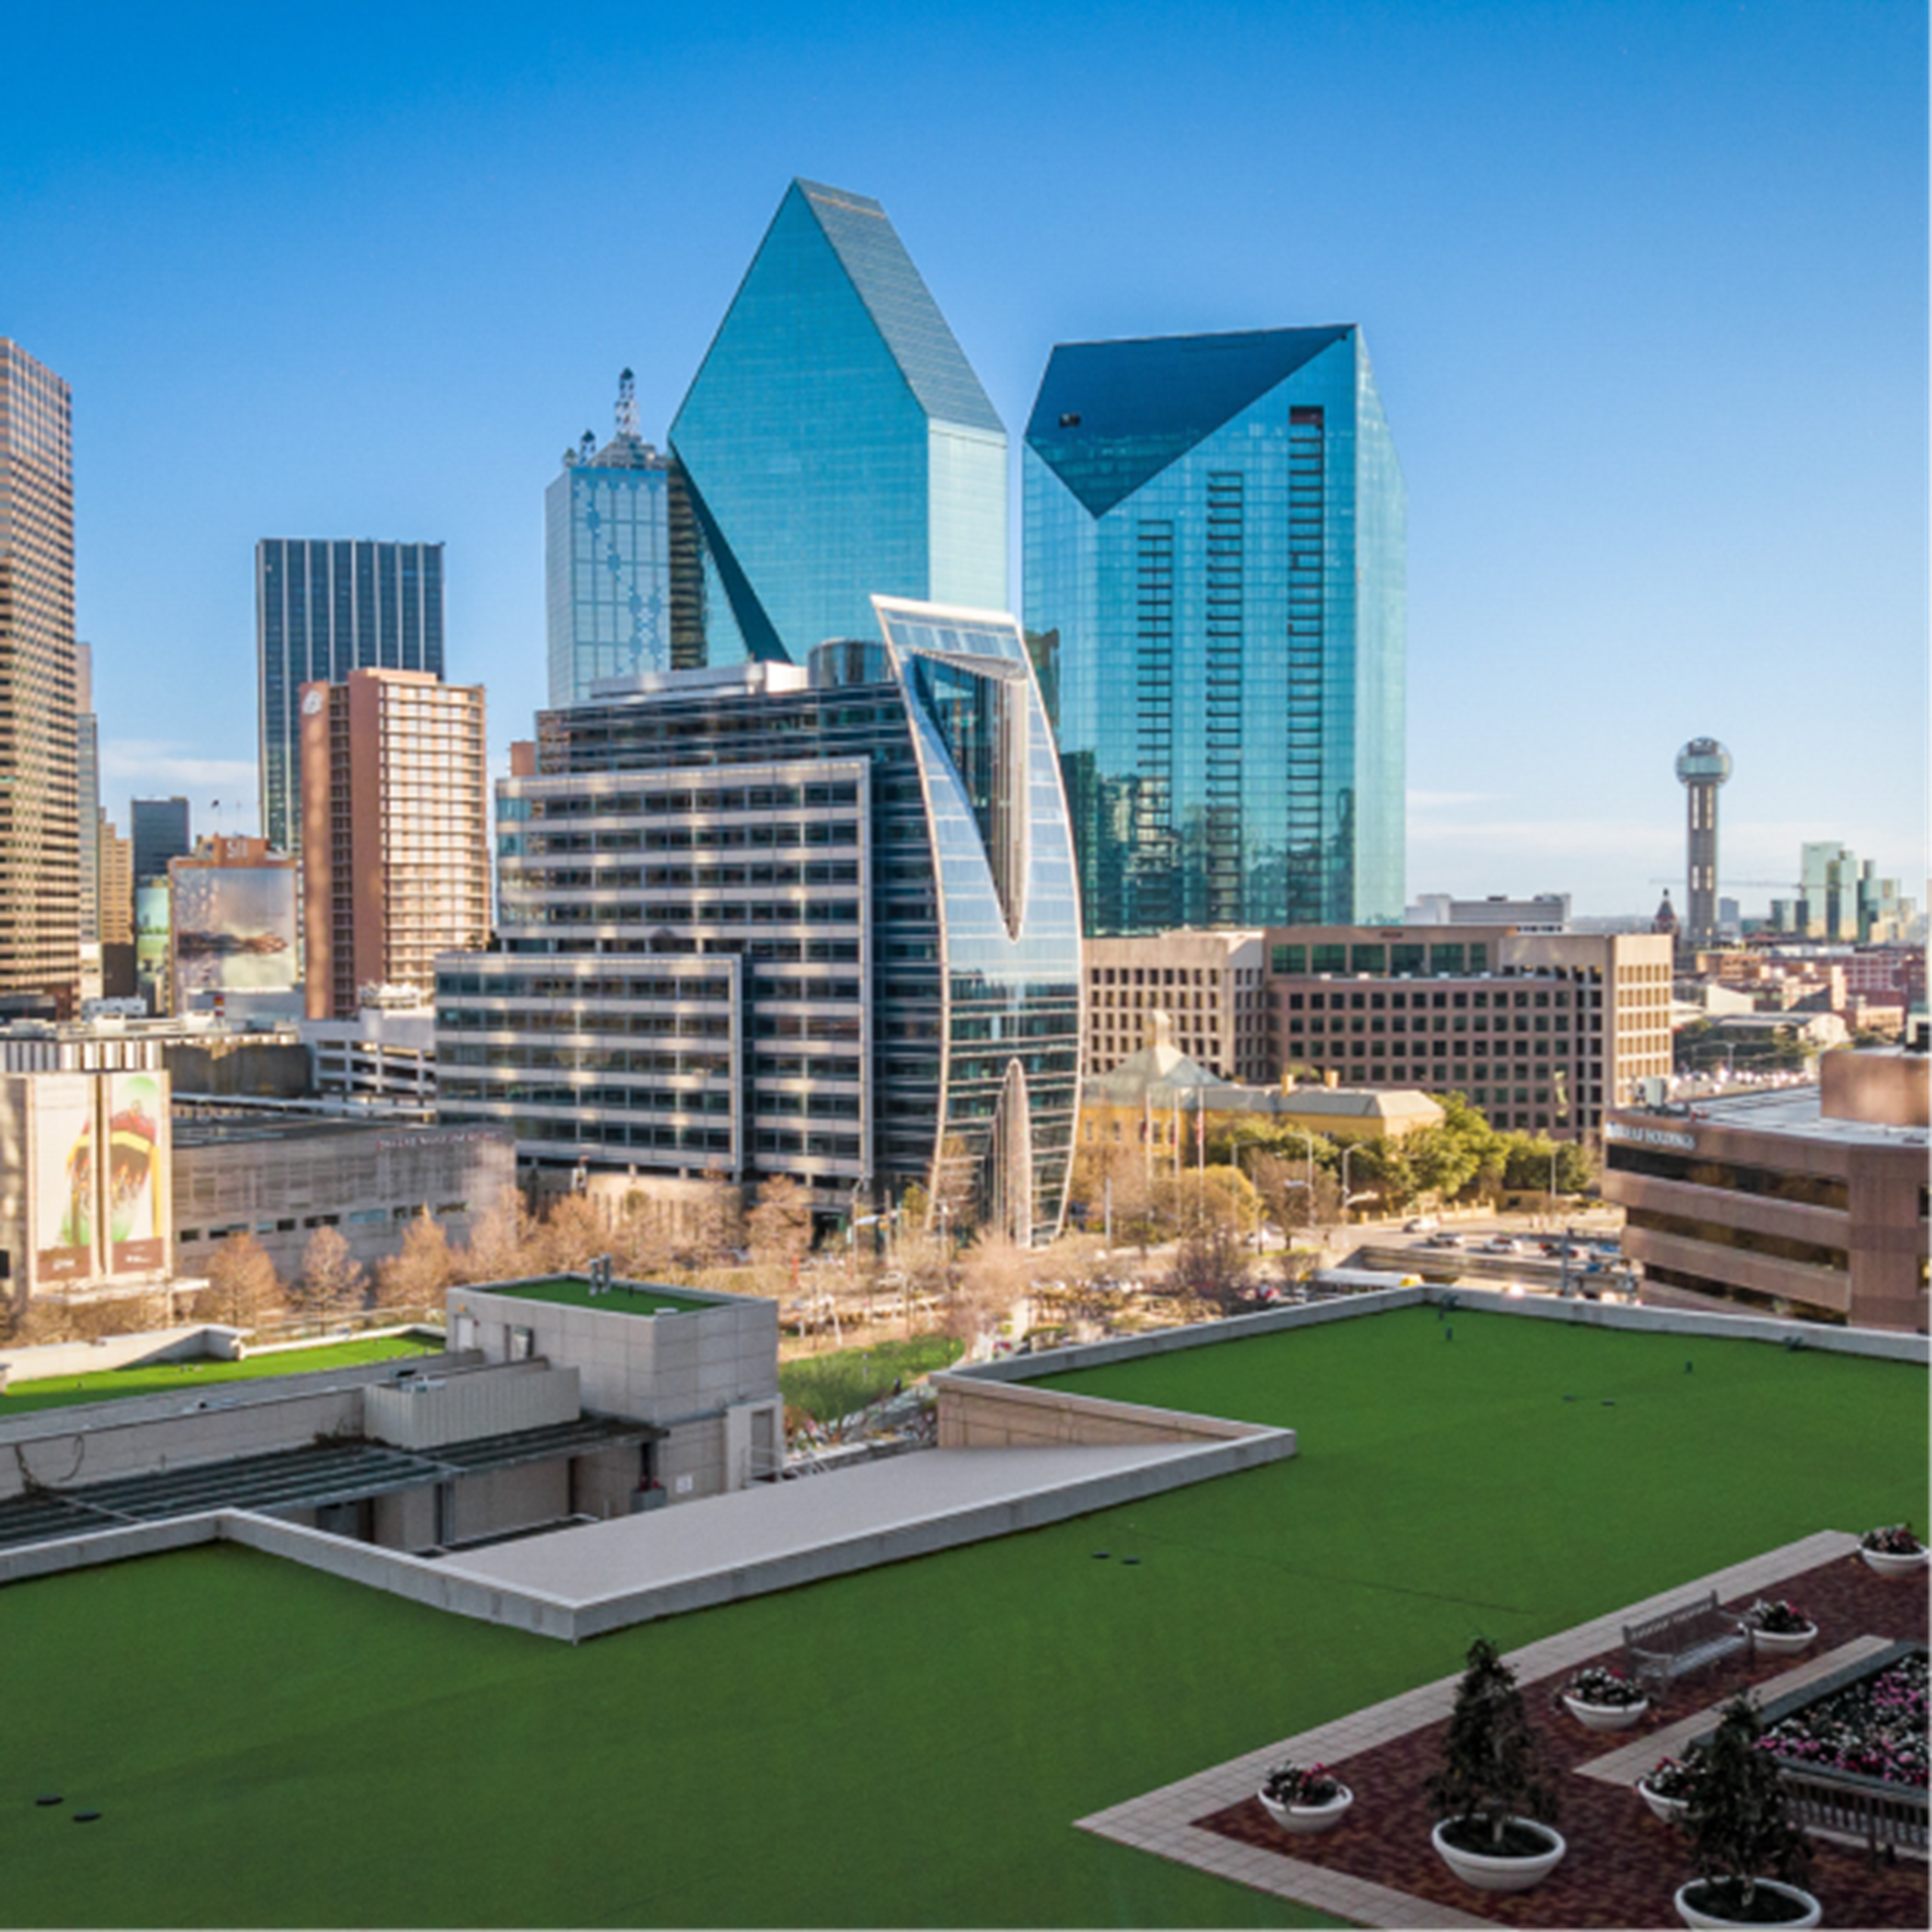 Downtown Dallas showing park and skyline